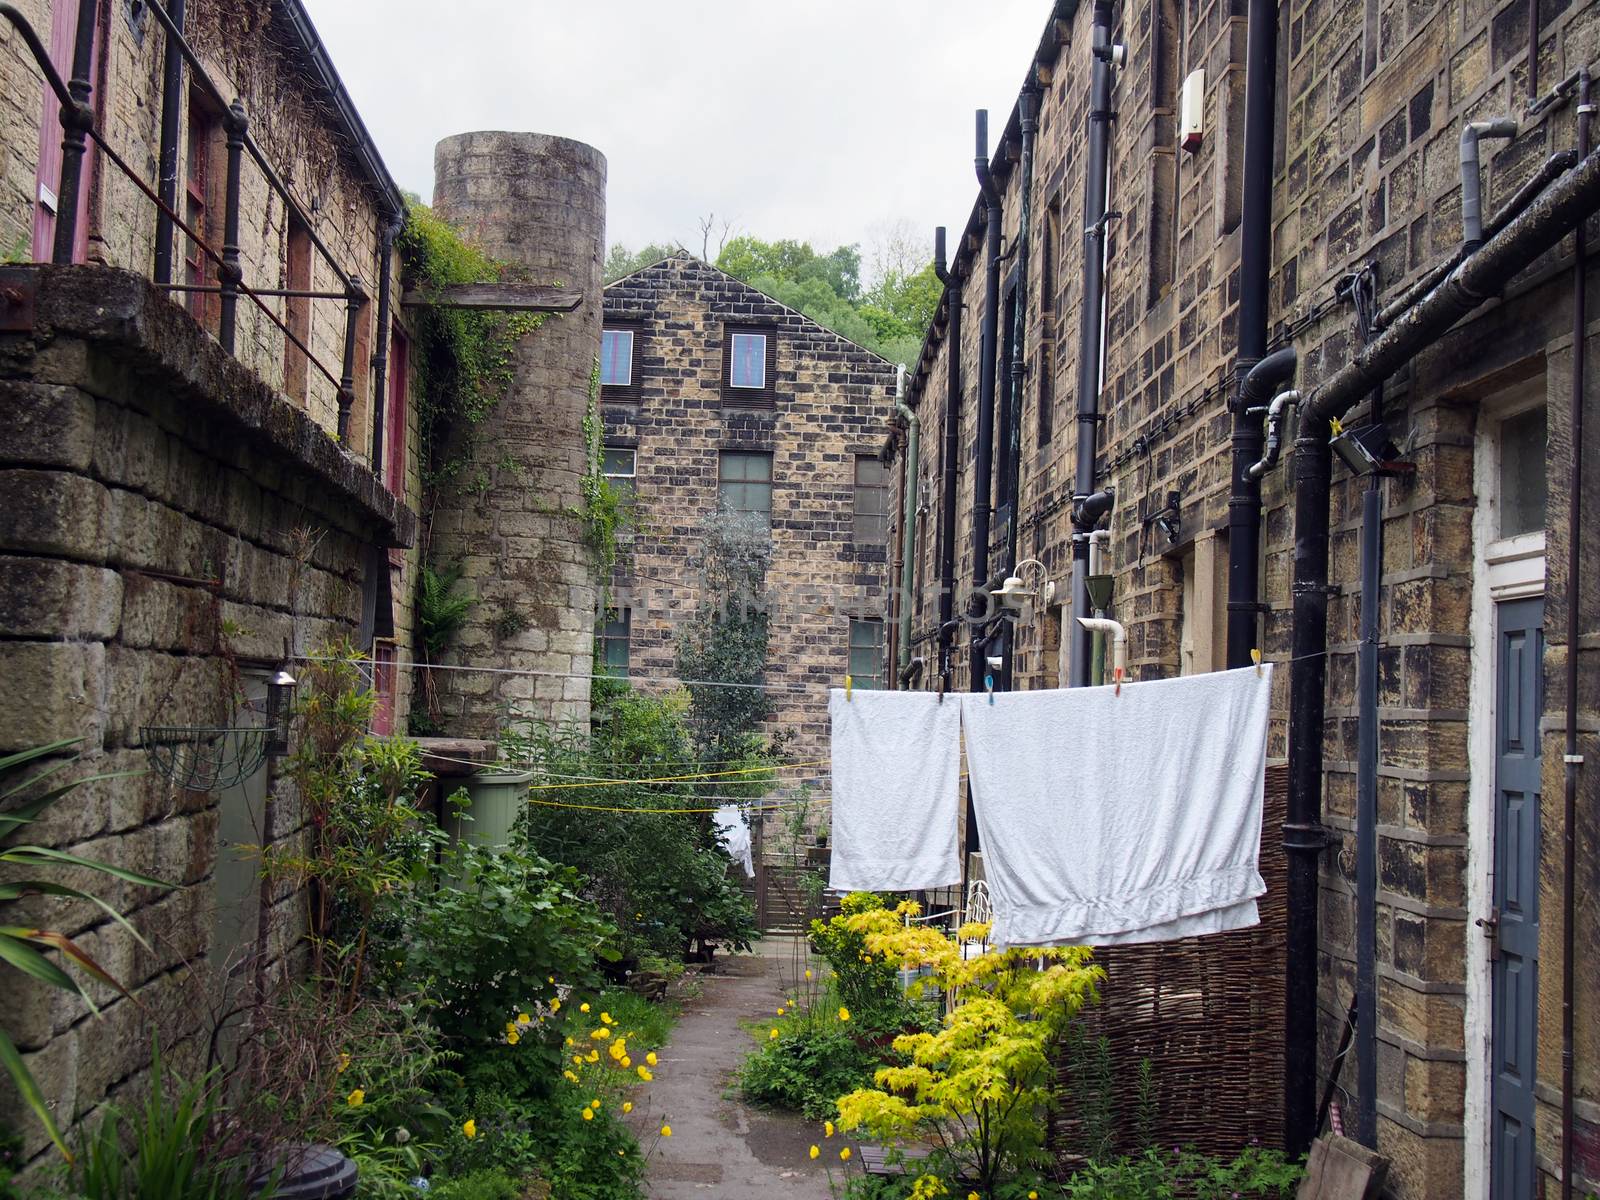 a row of typical traditional yorkshire stone houses in a small terraced street with garden flowers and washing drying on a line in hebden bridge